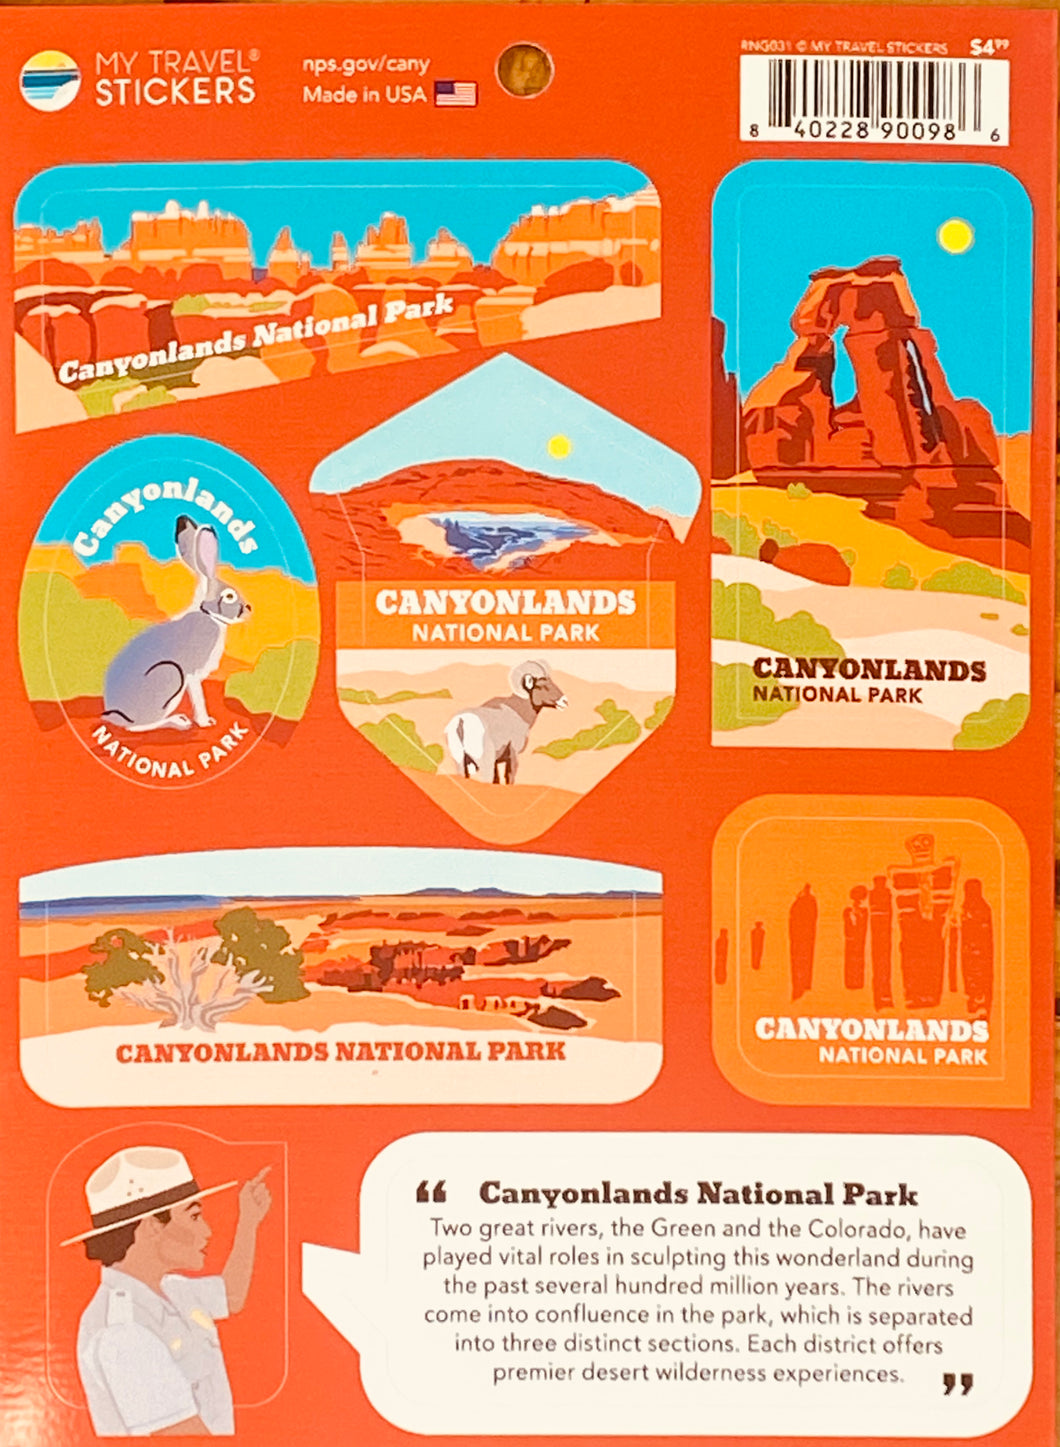 Canyonlands Ranger Says Stickers